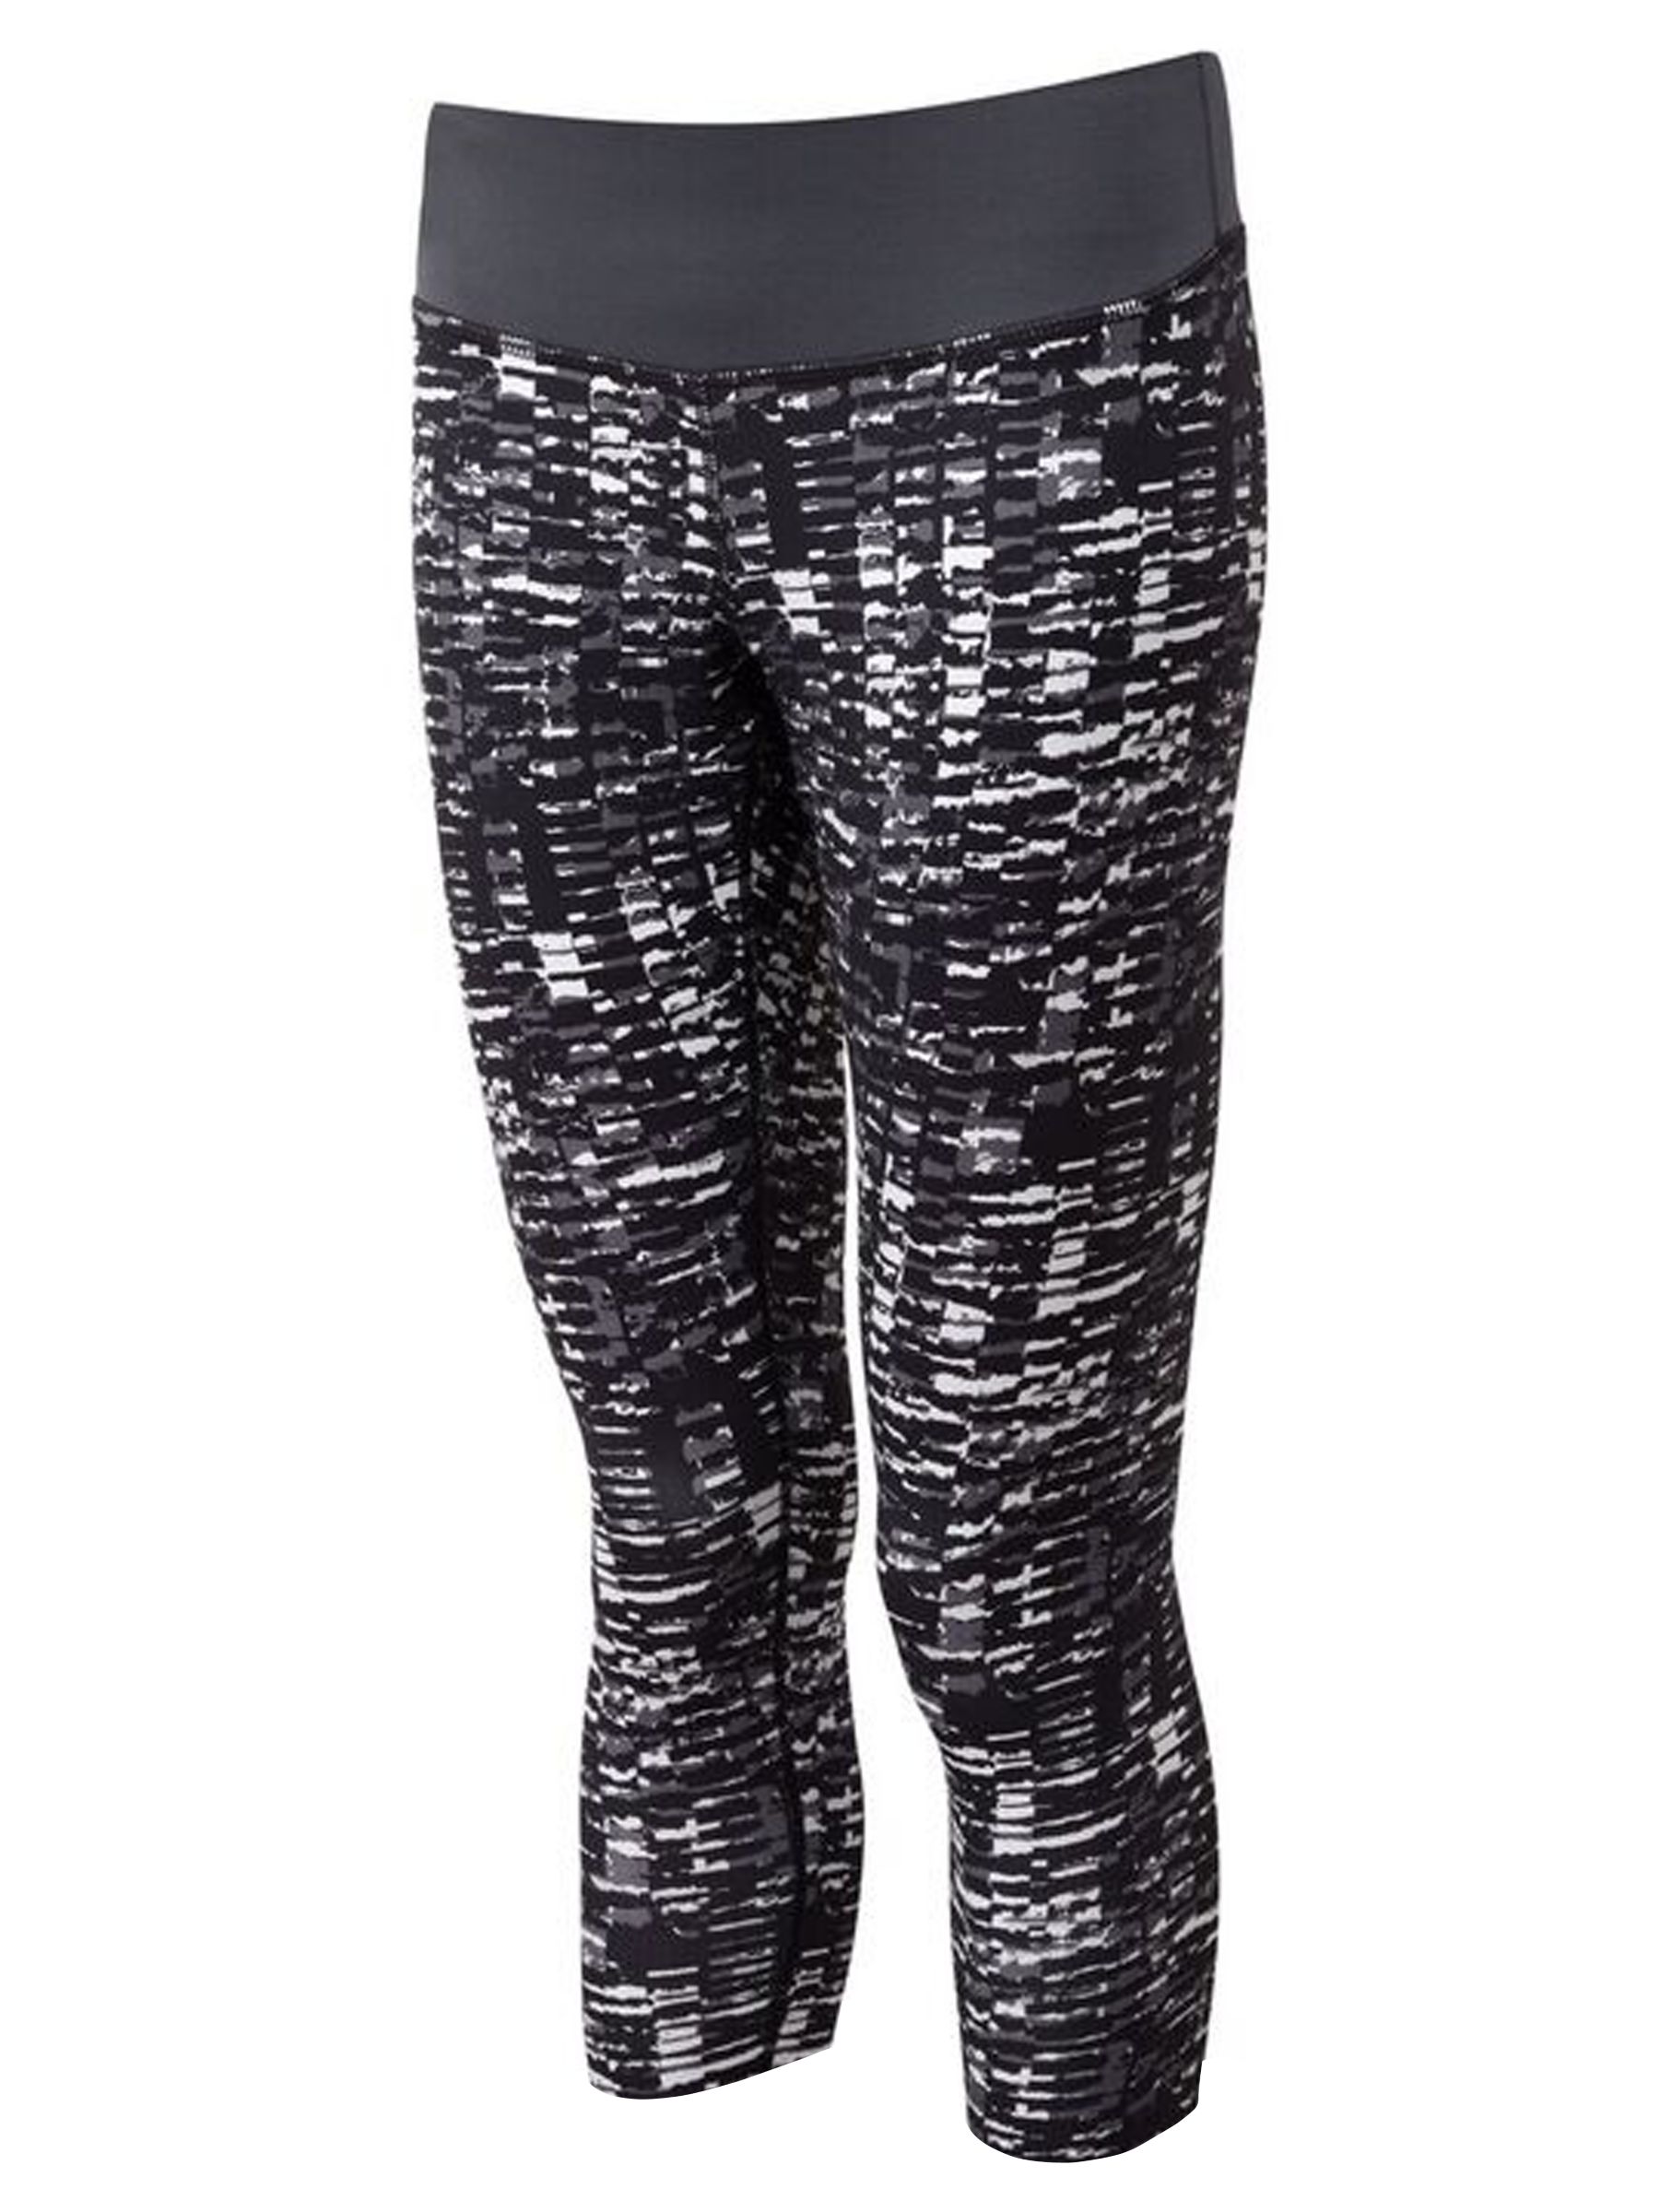 Ronhill Momentum Cropped Running Tights, Grey Sponge, 16